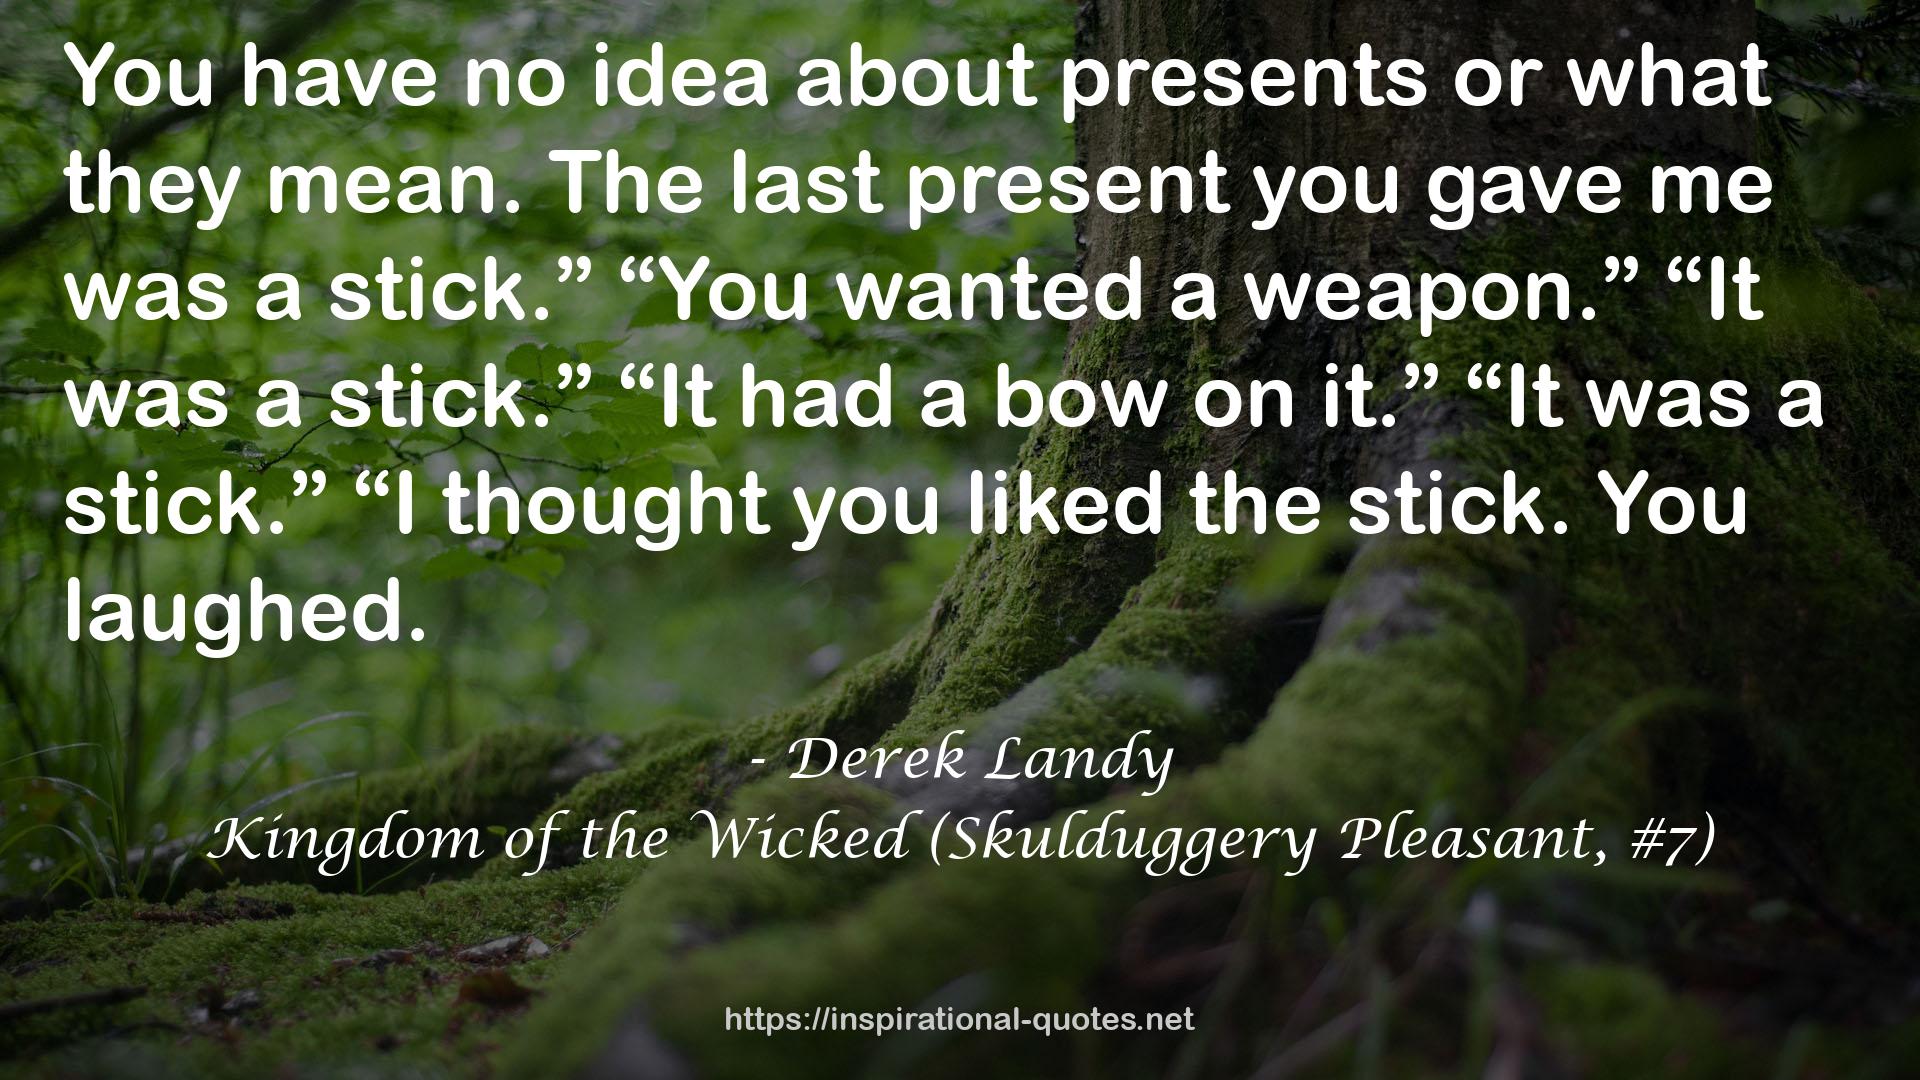 Kingdom of the Wicked (Skulduggery Pleasant, #7) QUOTES